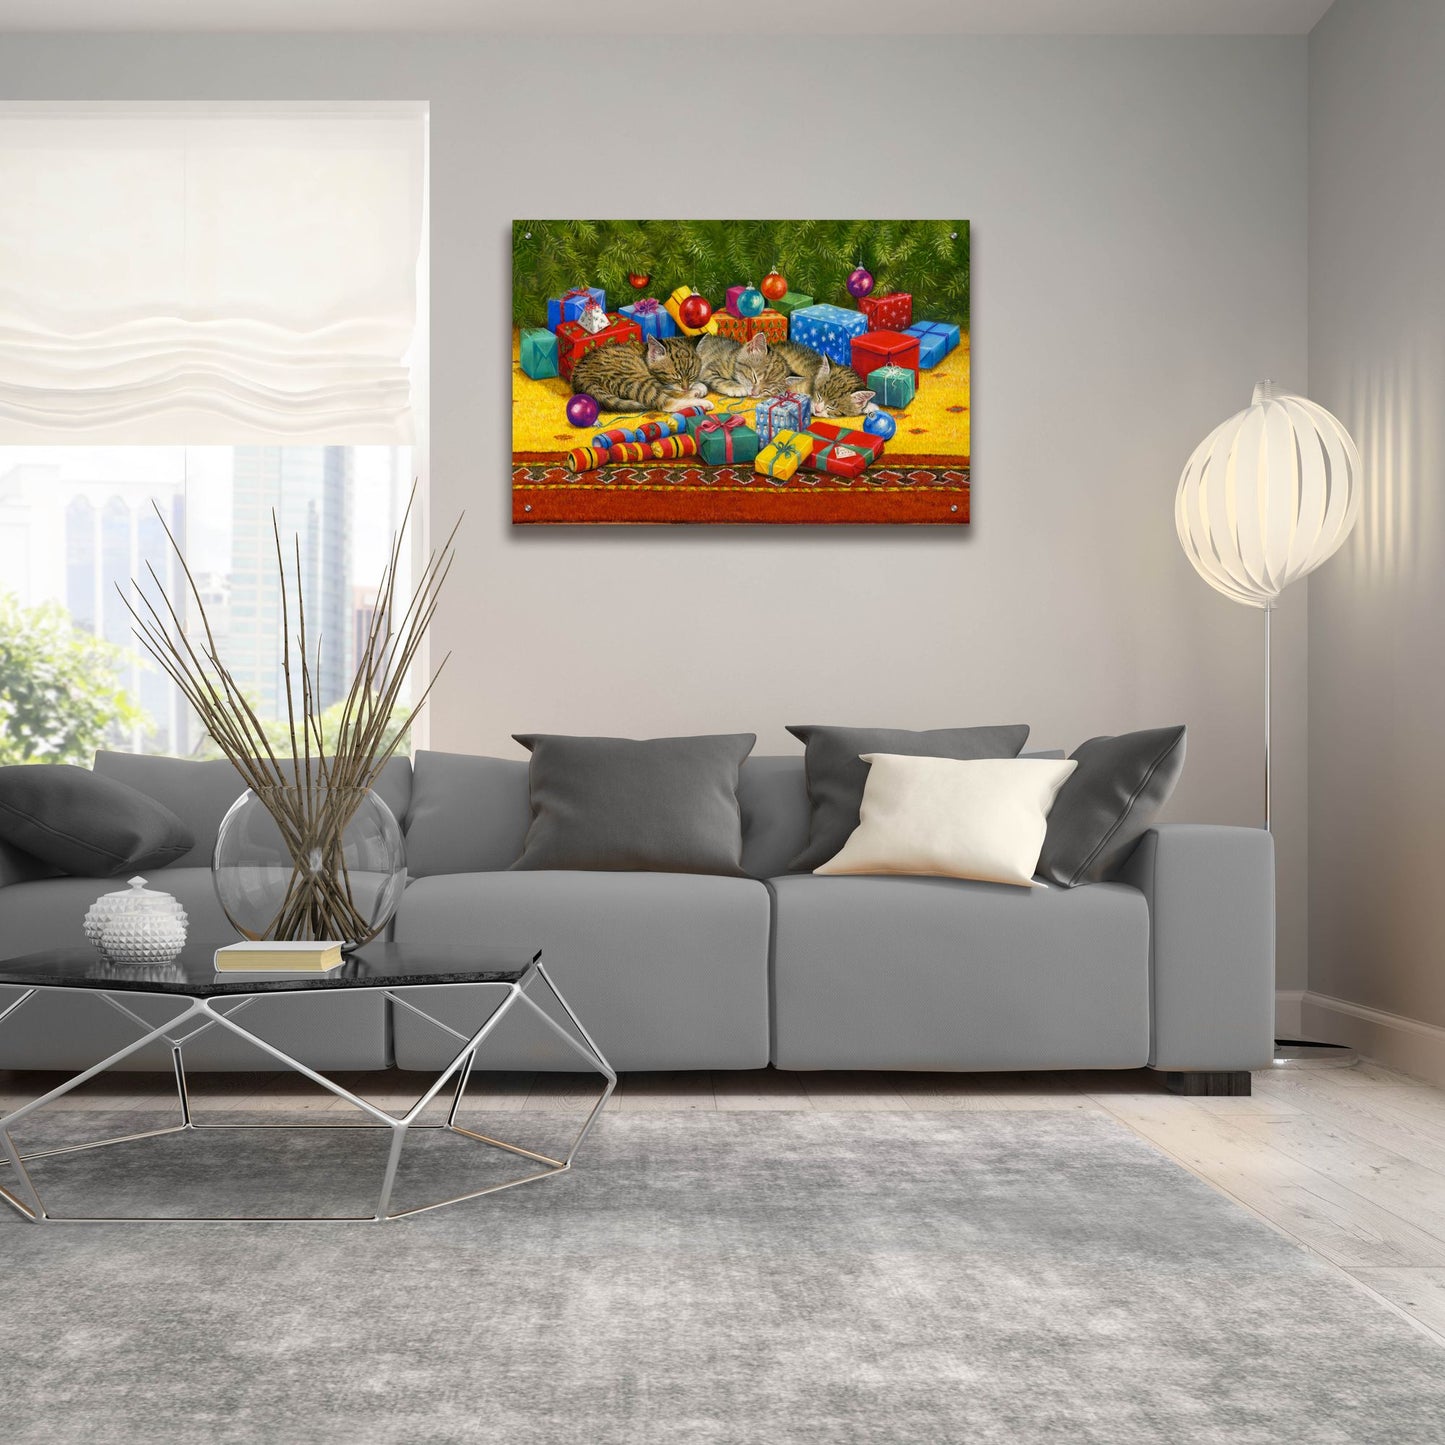 Epic Art 'Under The Christmas Tree' by Janet Pidoux, Acrylic Glass Wall Art,36x24